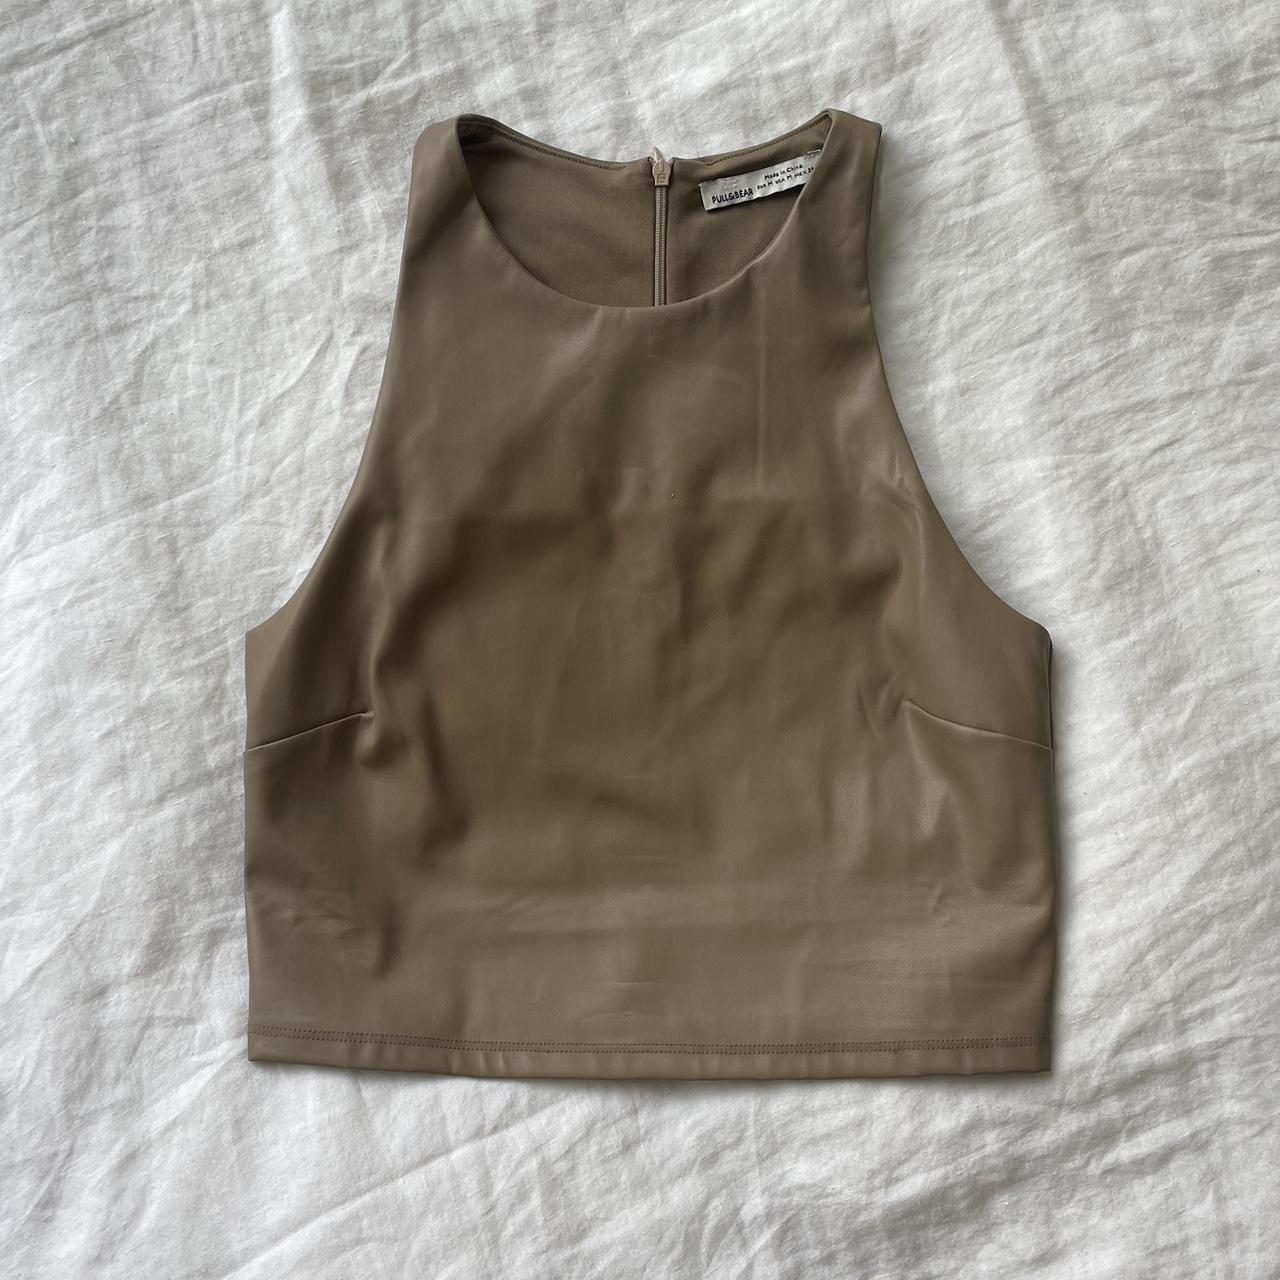 Modern high neck, faux leather tank. Perfect for in... - Depop